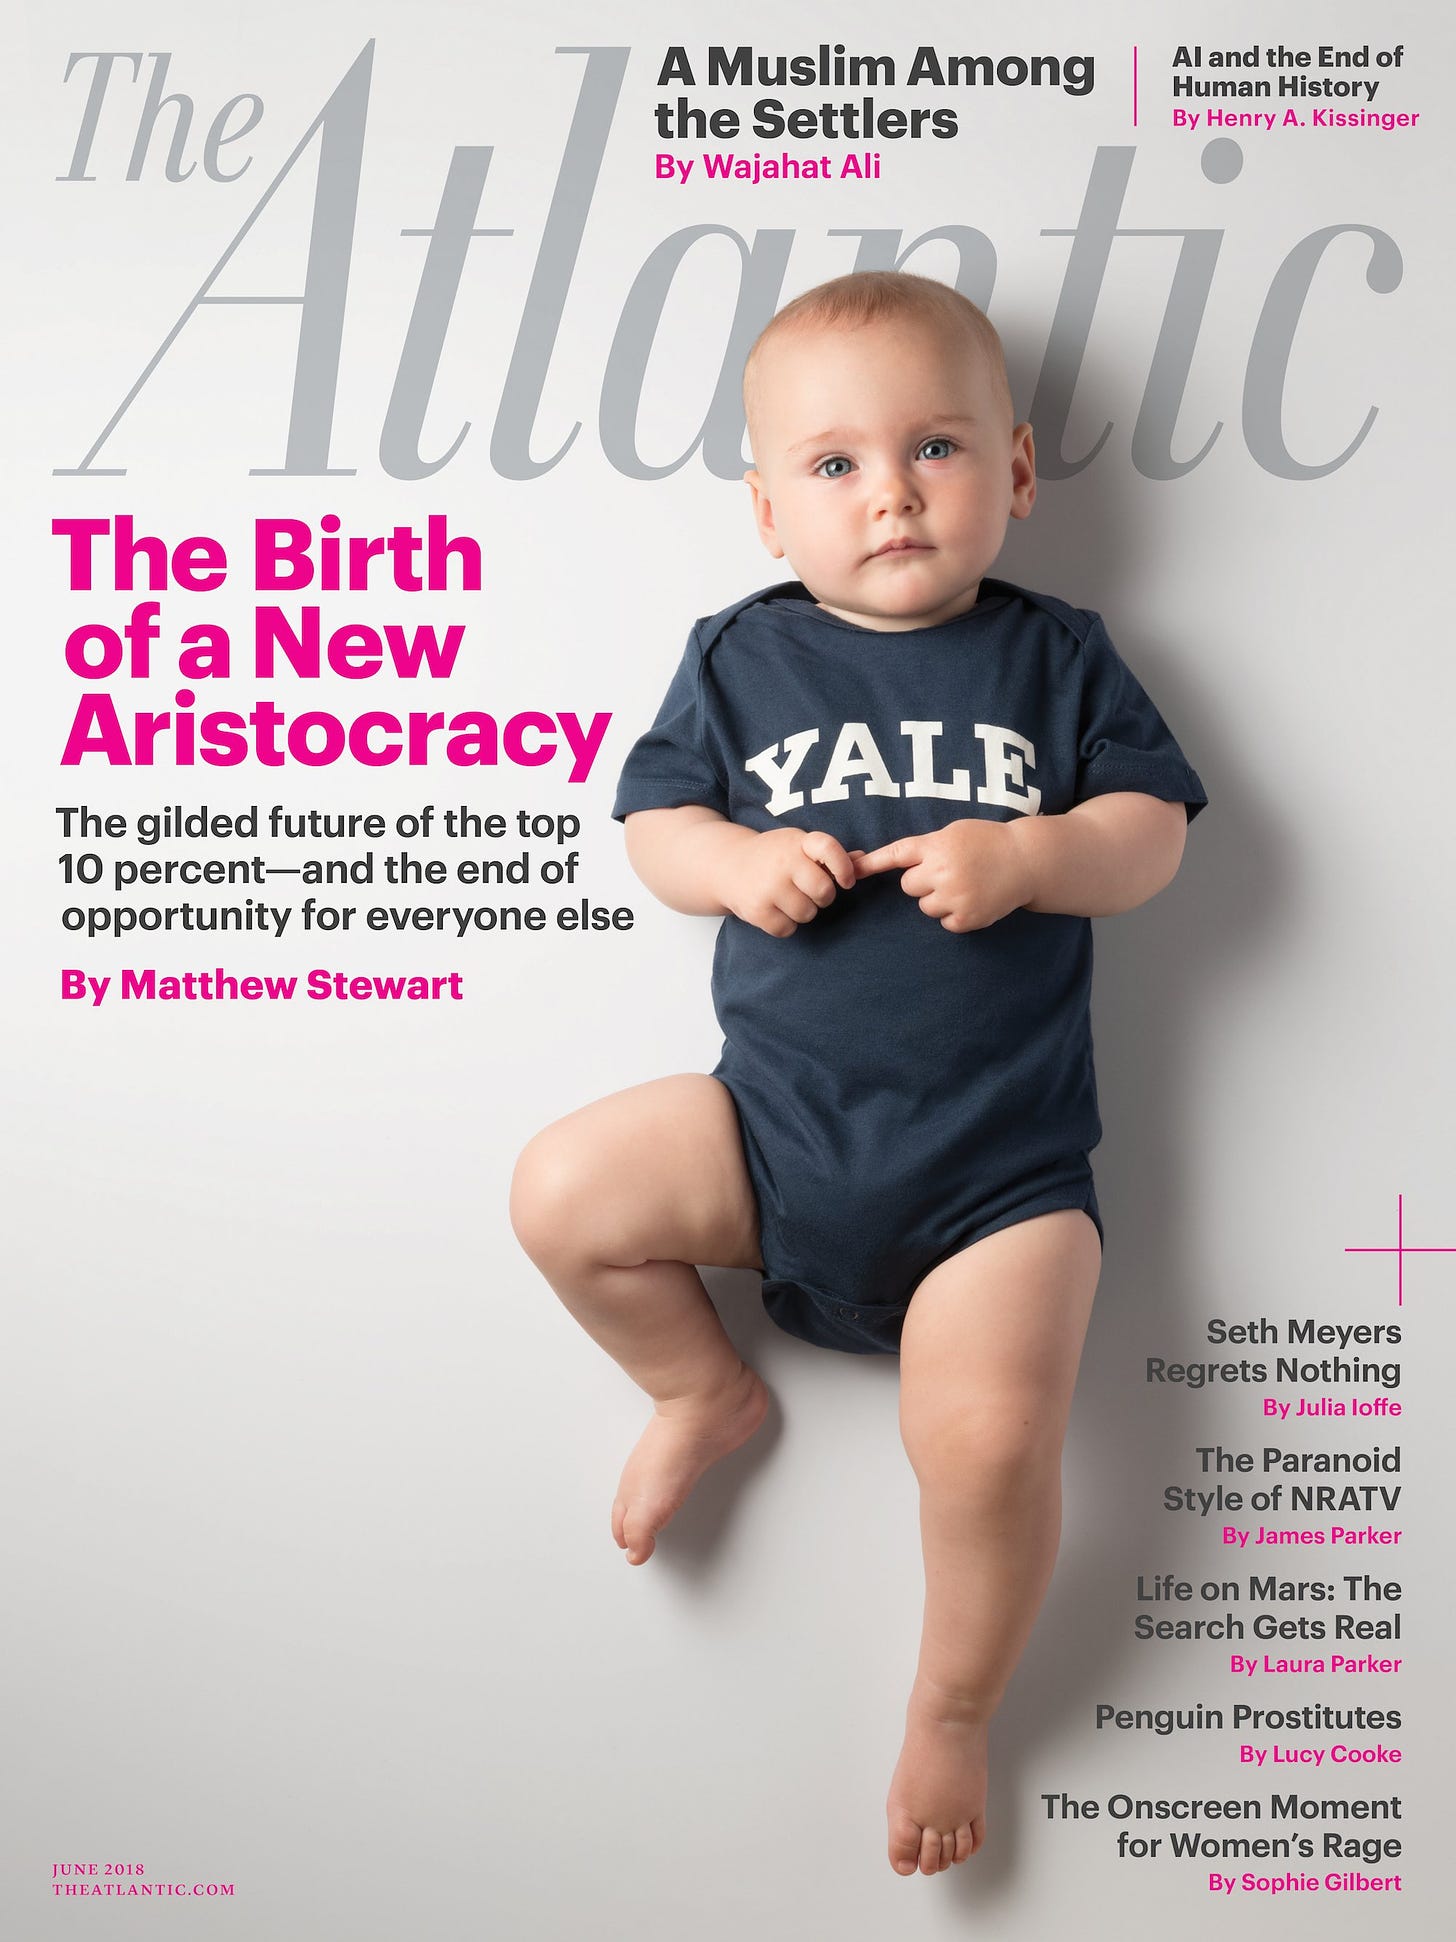 The Atlantic on Twitter: "JUST POSTED: Our June cover story on the new  American aristocracy, by Matthew Stewart: https://t.co/PQhPbPHZ4W  https://t.co/9KFme0j2or" / Twitter